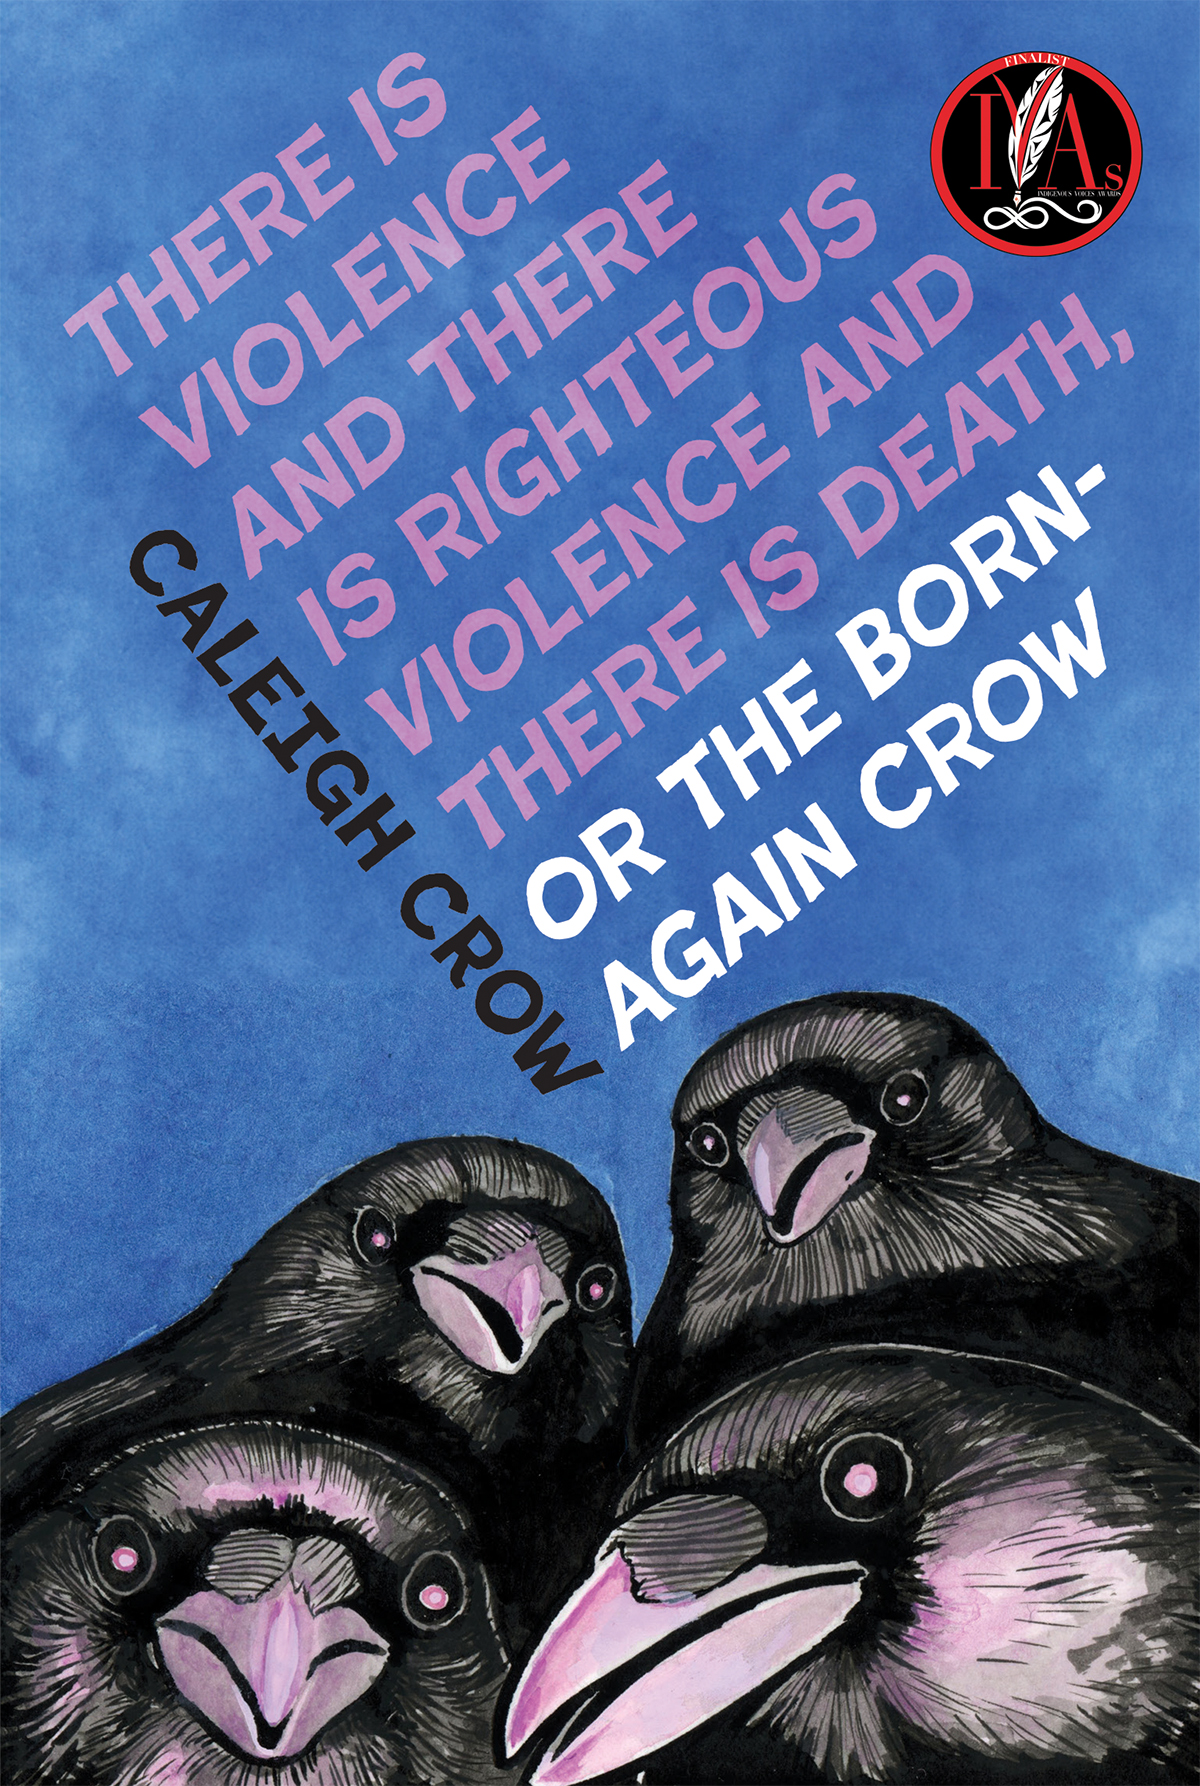 The cover of There is Violence and There is Righteous Violence and There is Death or, The Born-Again Crow by Caleigh Crow 
